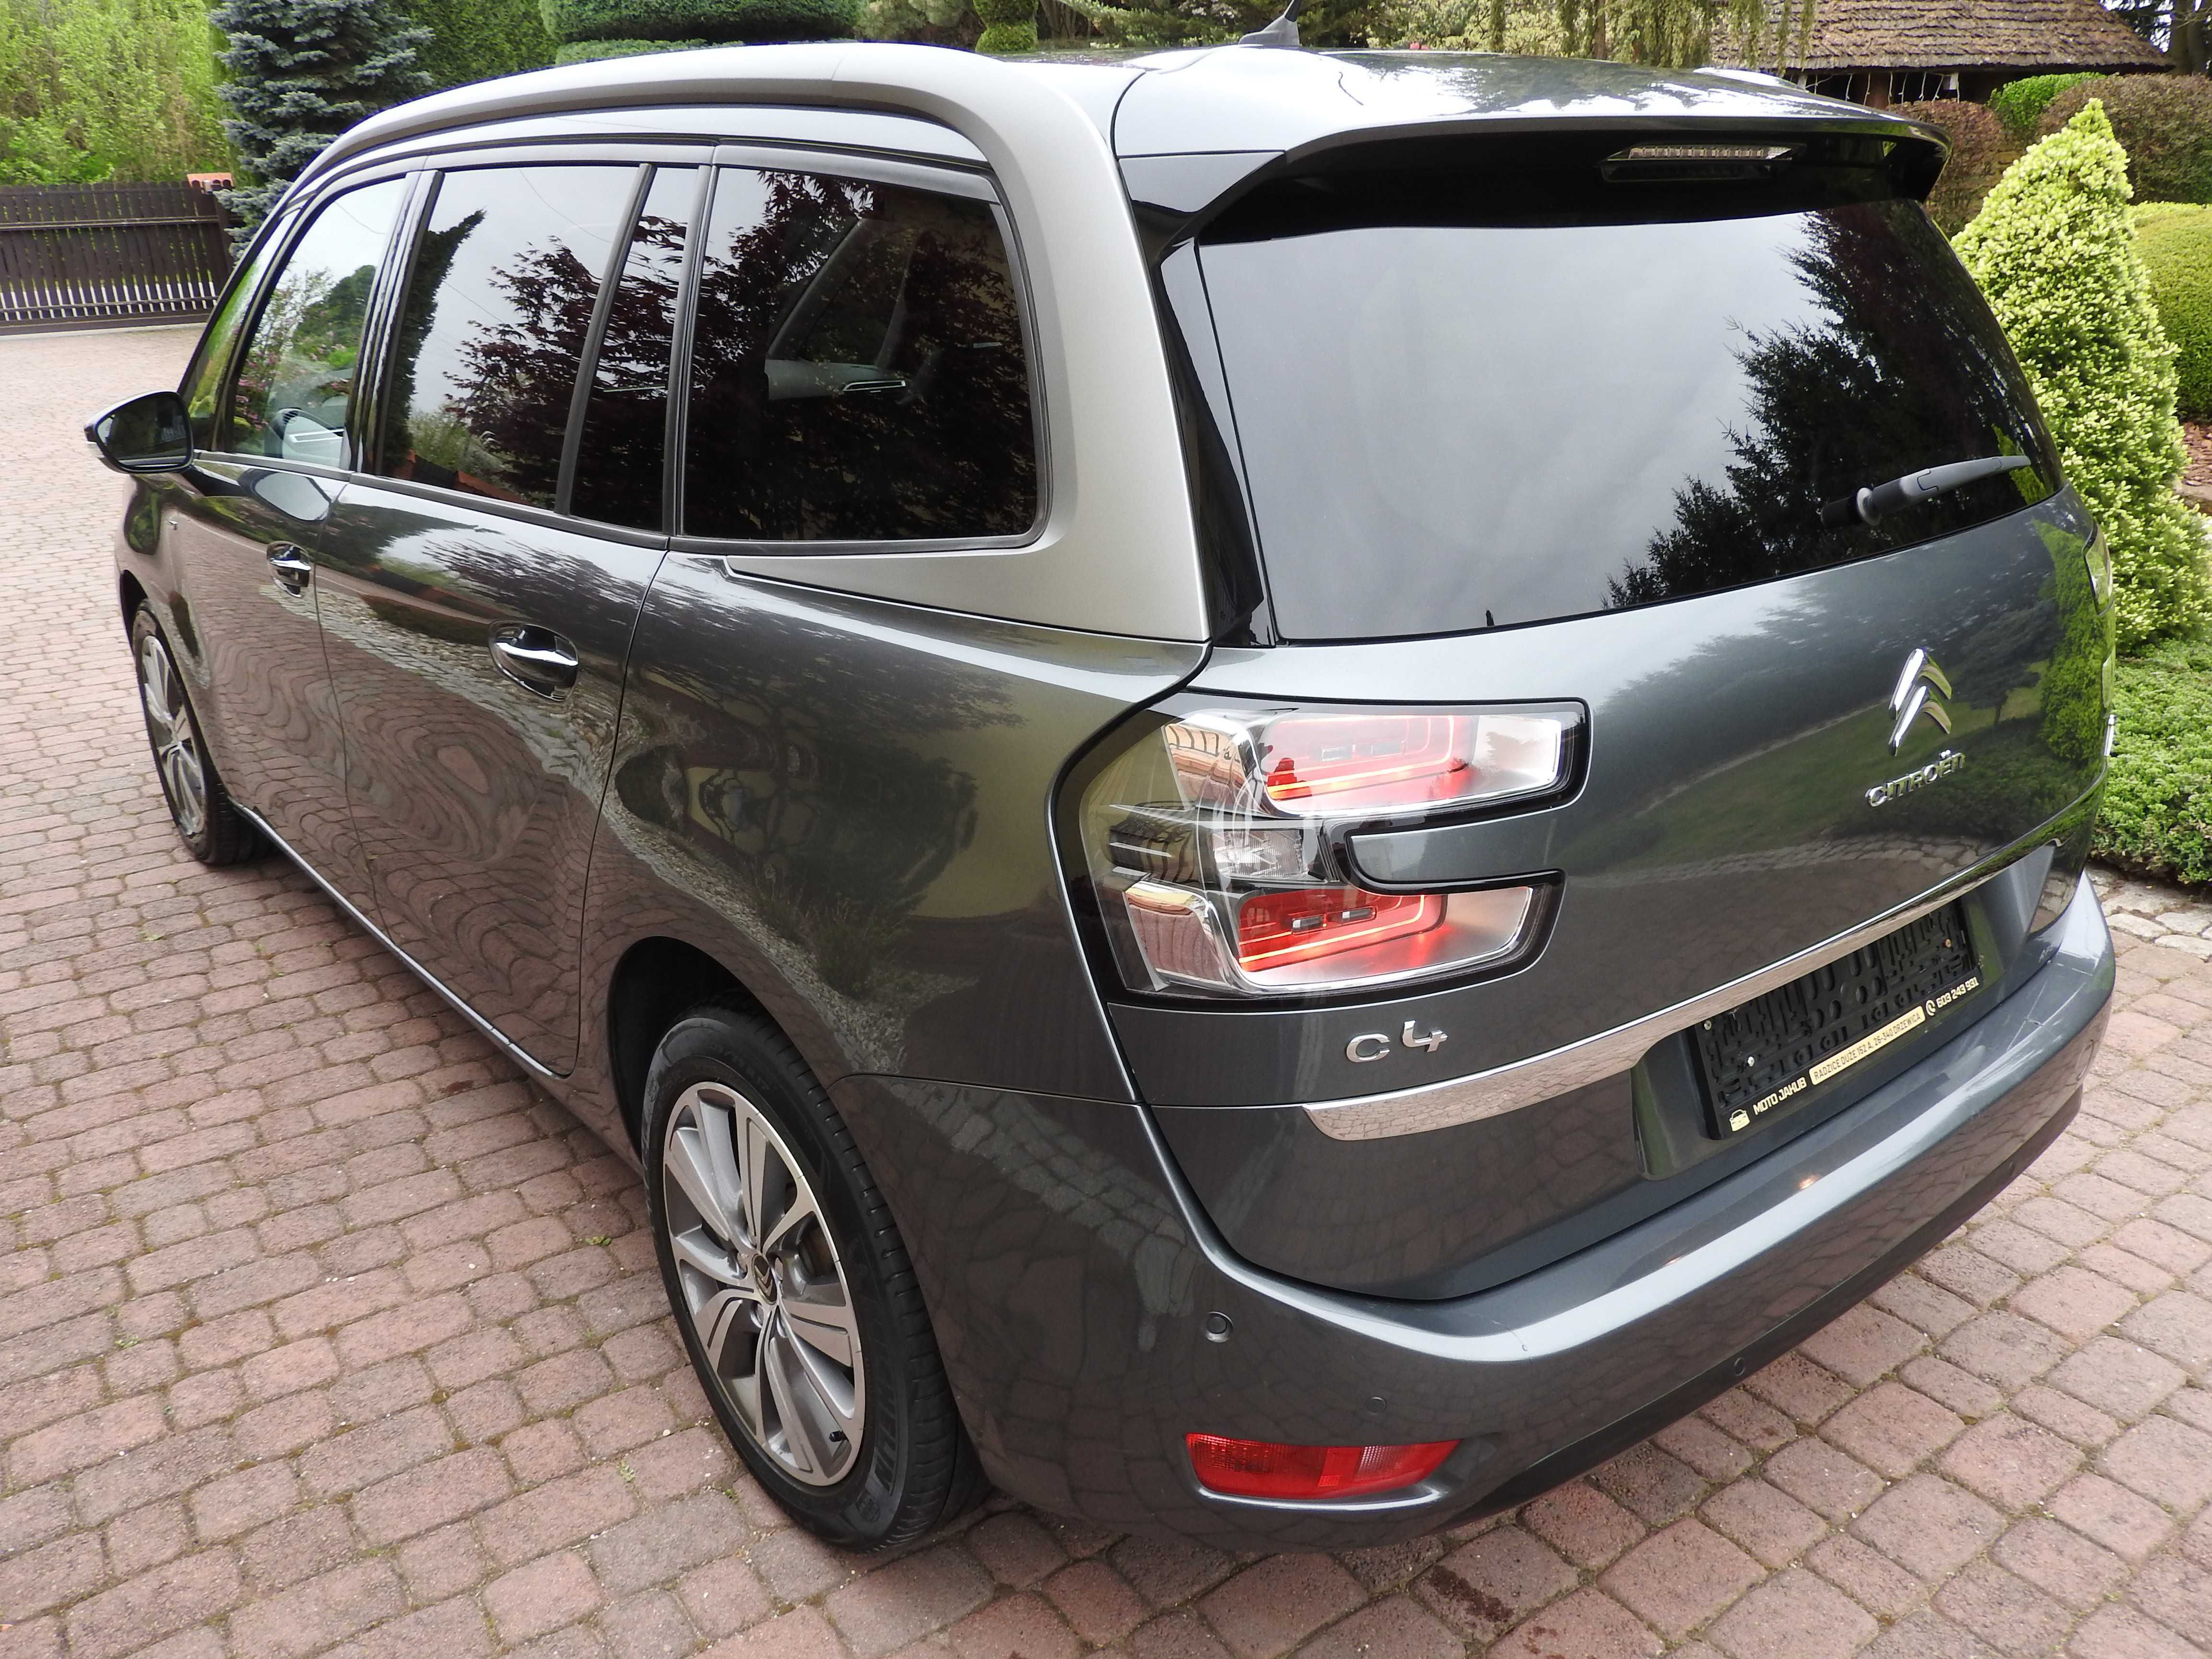 Citroen C4 Grand Picasso #7 osobowy#Exclusive#Benzyna #Masaże#Automat#